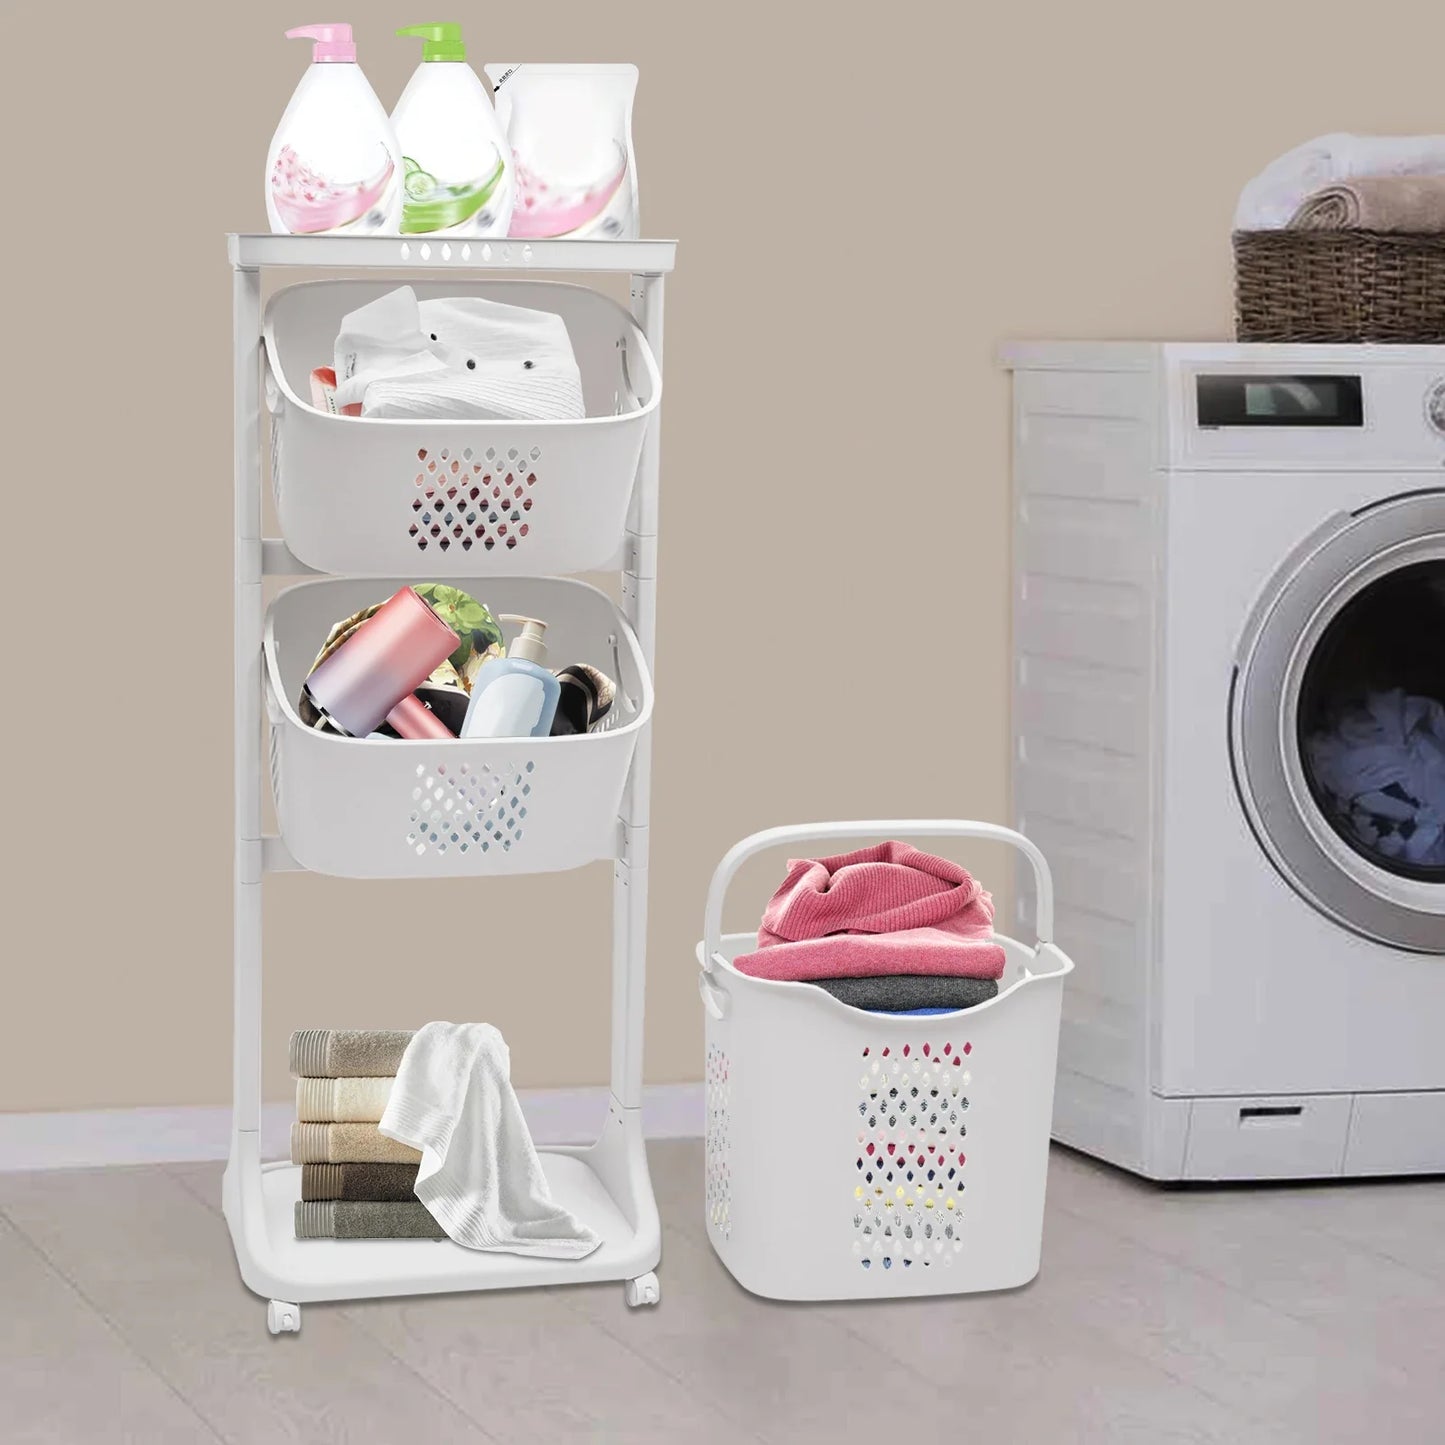 3-Layer Laundry Basket with Wheels Clothes Storage Basket